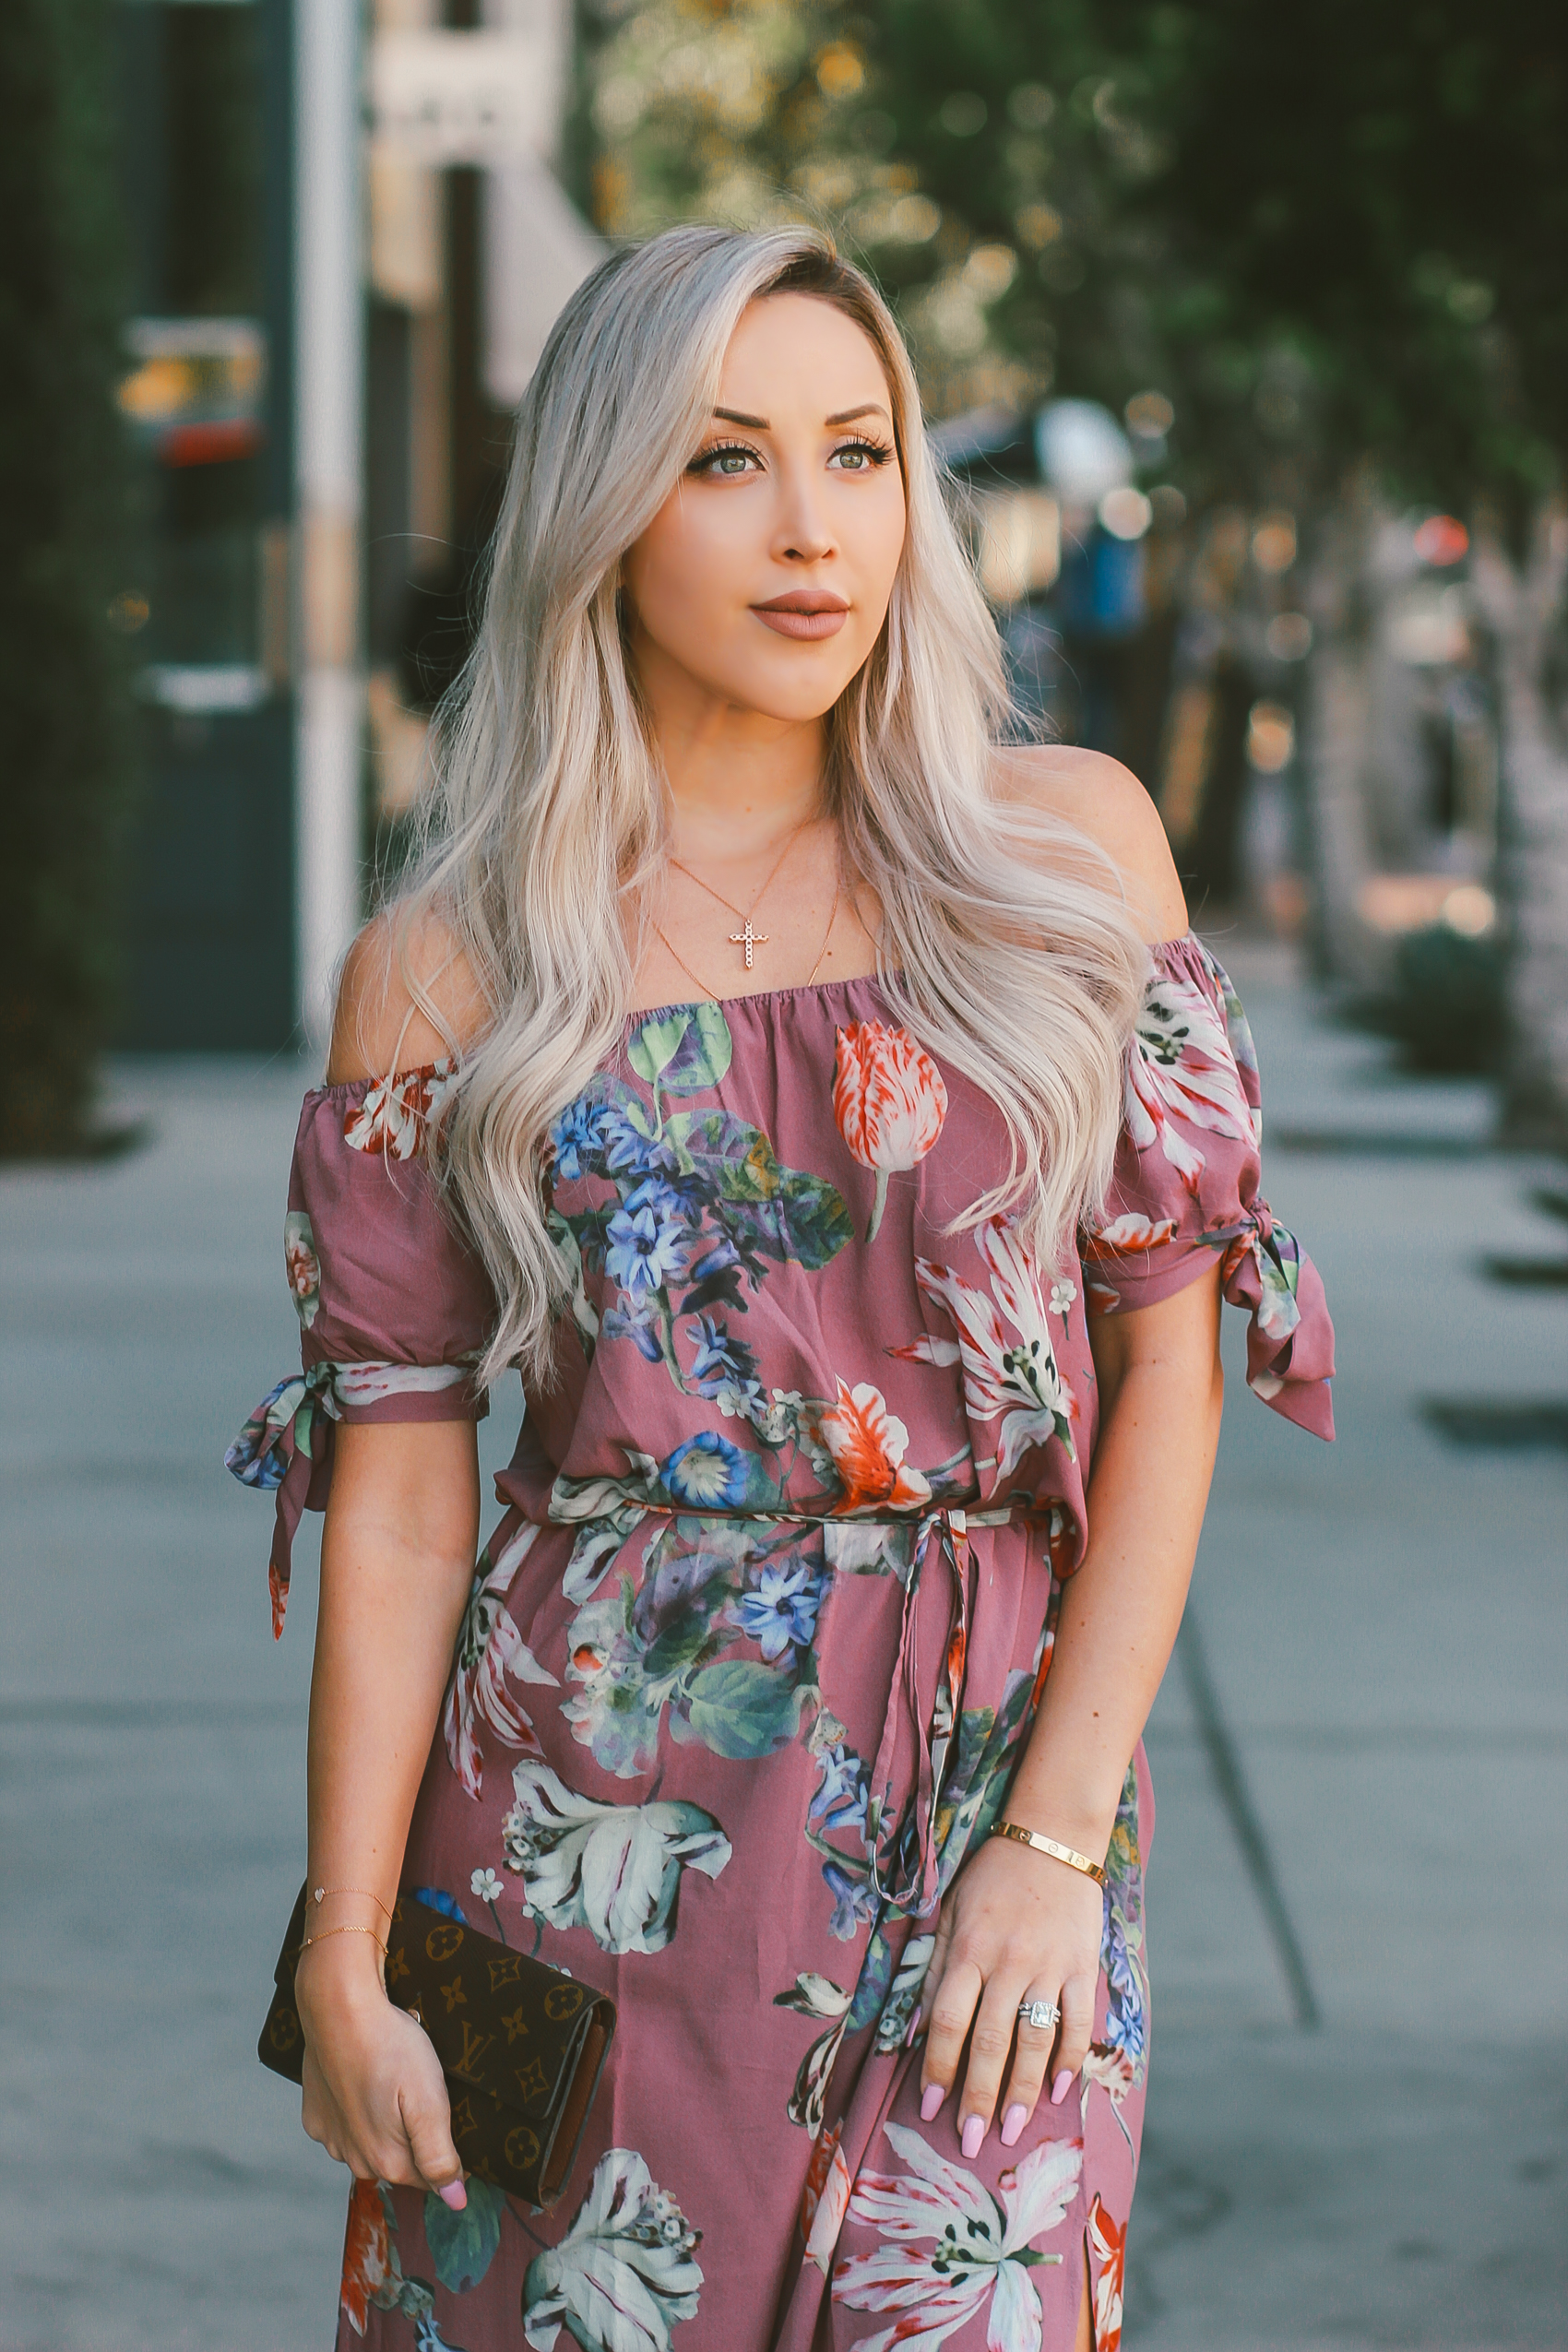 A Plum Floral Dress from @plumprettysugar | Spring Style | Blondie in the City by Hayley Larue